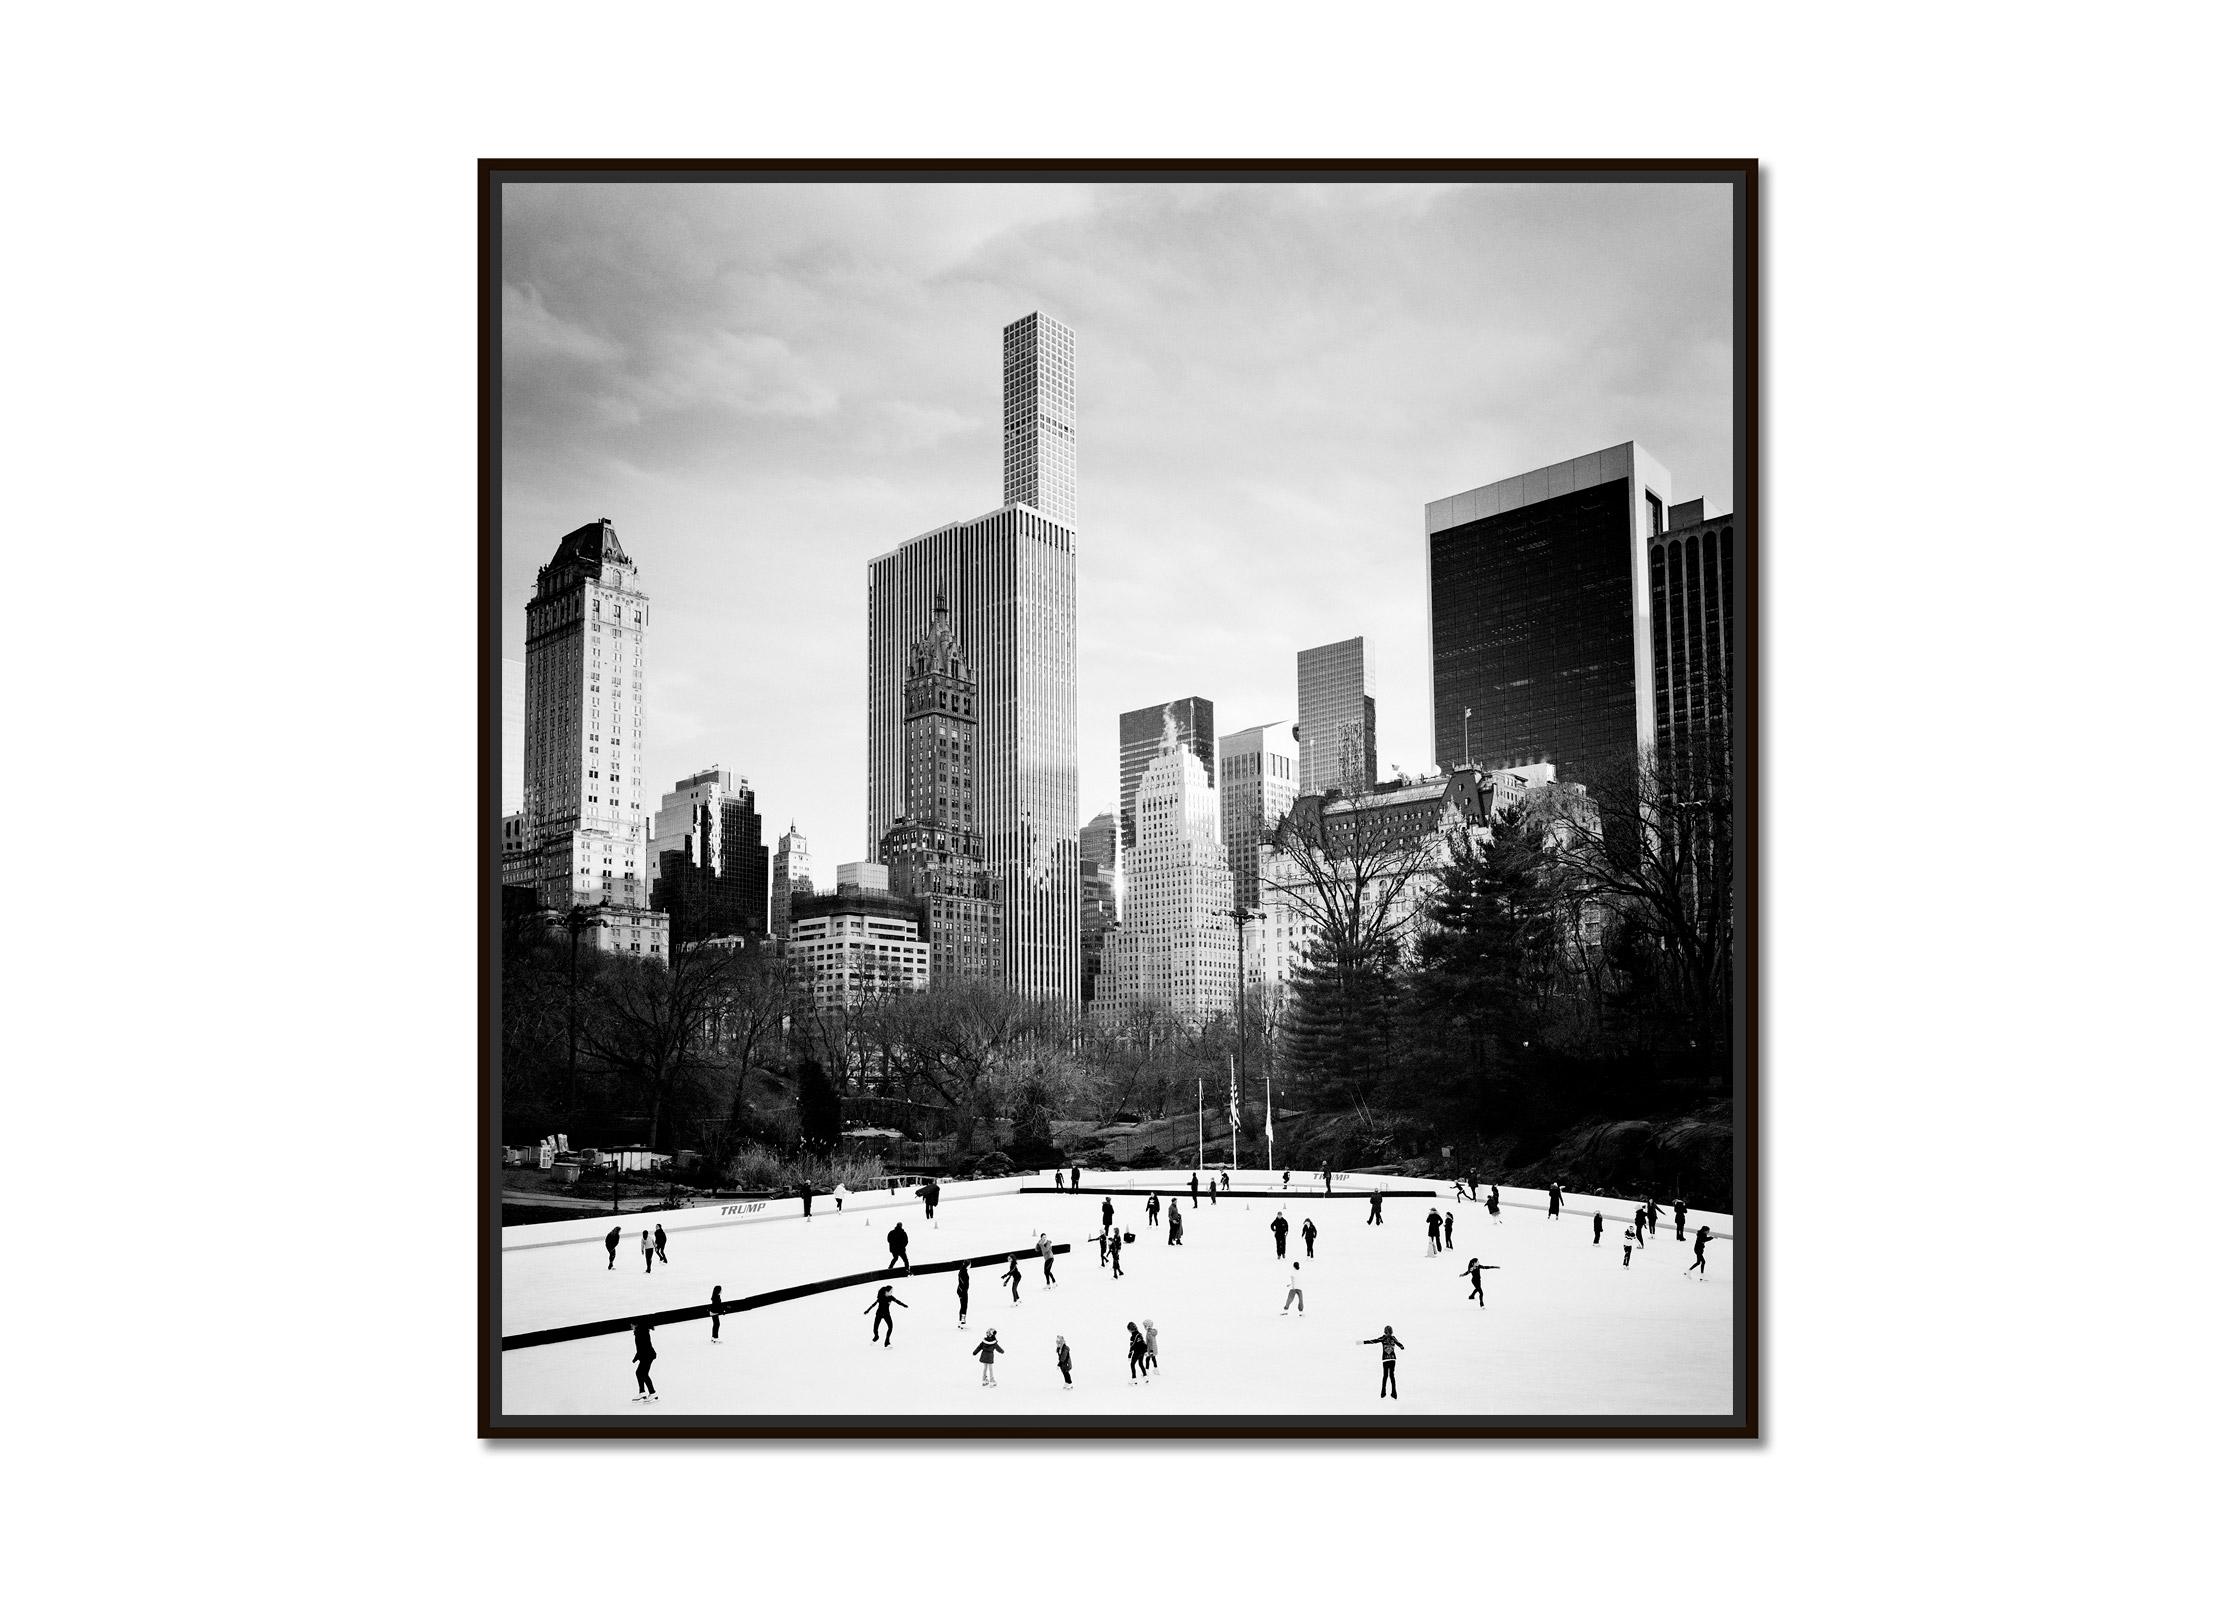 Dancing on Ice, skyscraper, New York, USA, black and white photography cityscape - Photograph by Gerald Berghammer